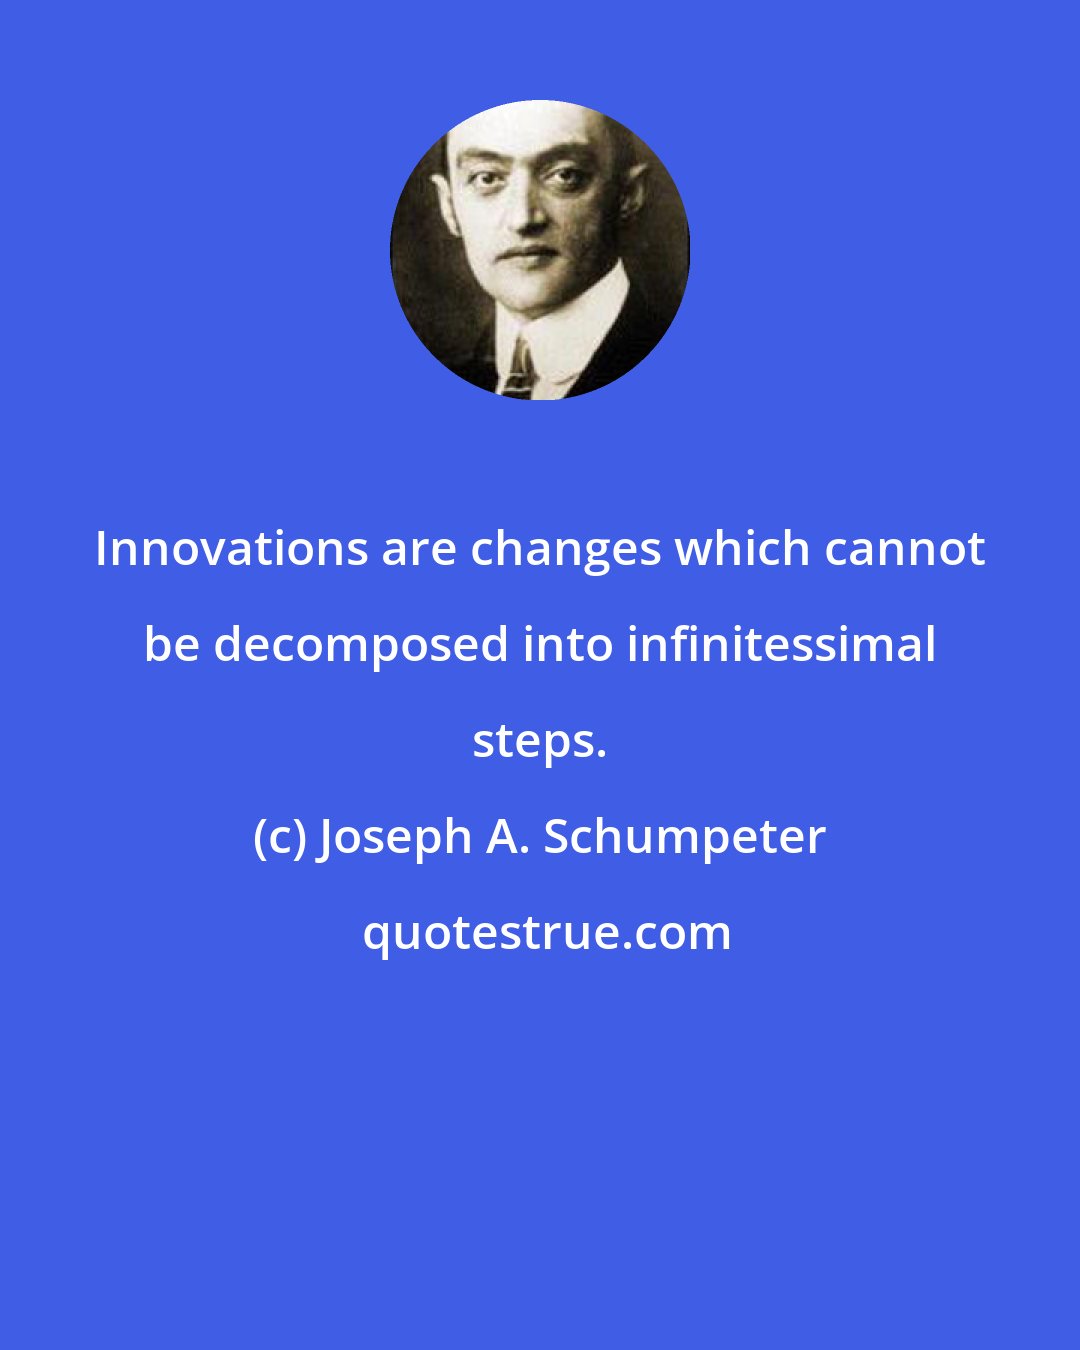 Joseph A. Schumpeter: Innovations are changes which cannot be decomposed into infinitessimal steps.